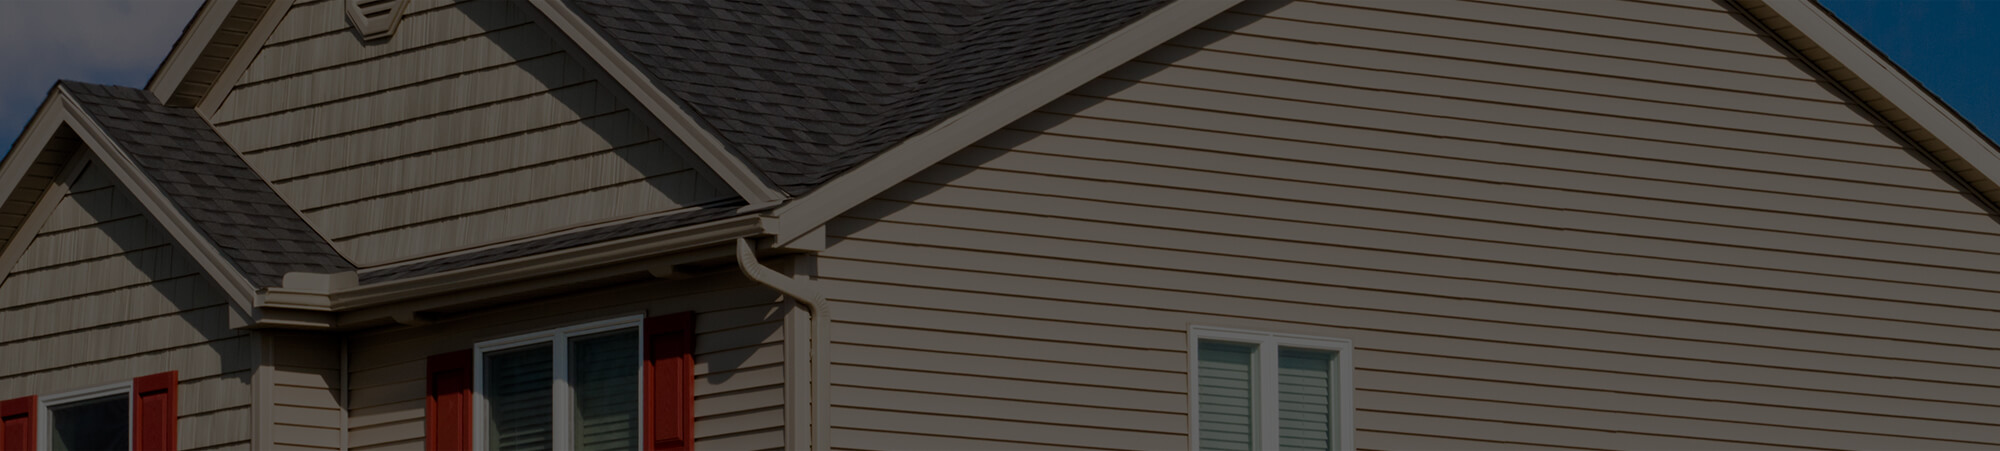 siding installation and replacement services in Oshkosh wi